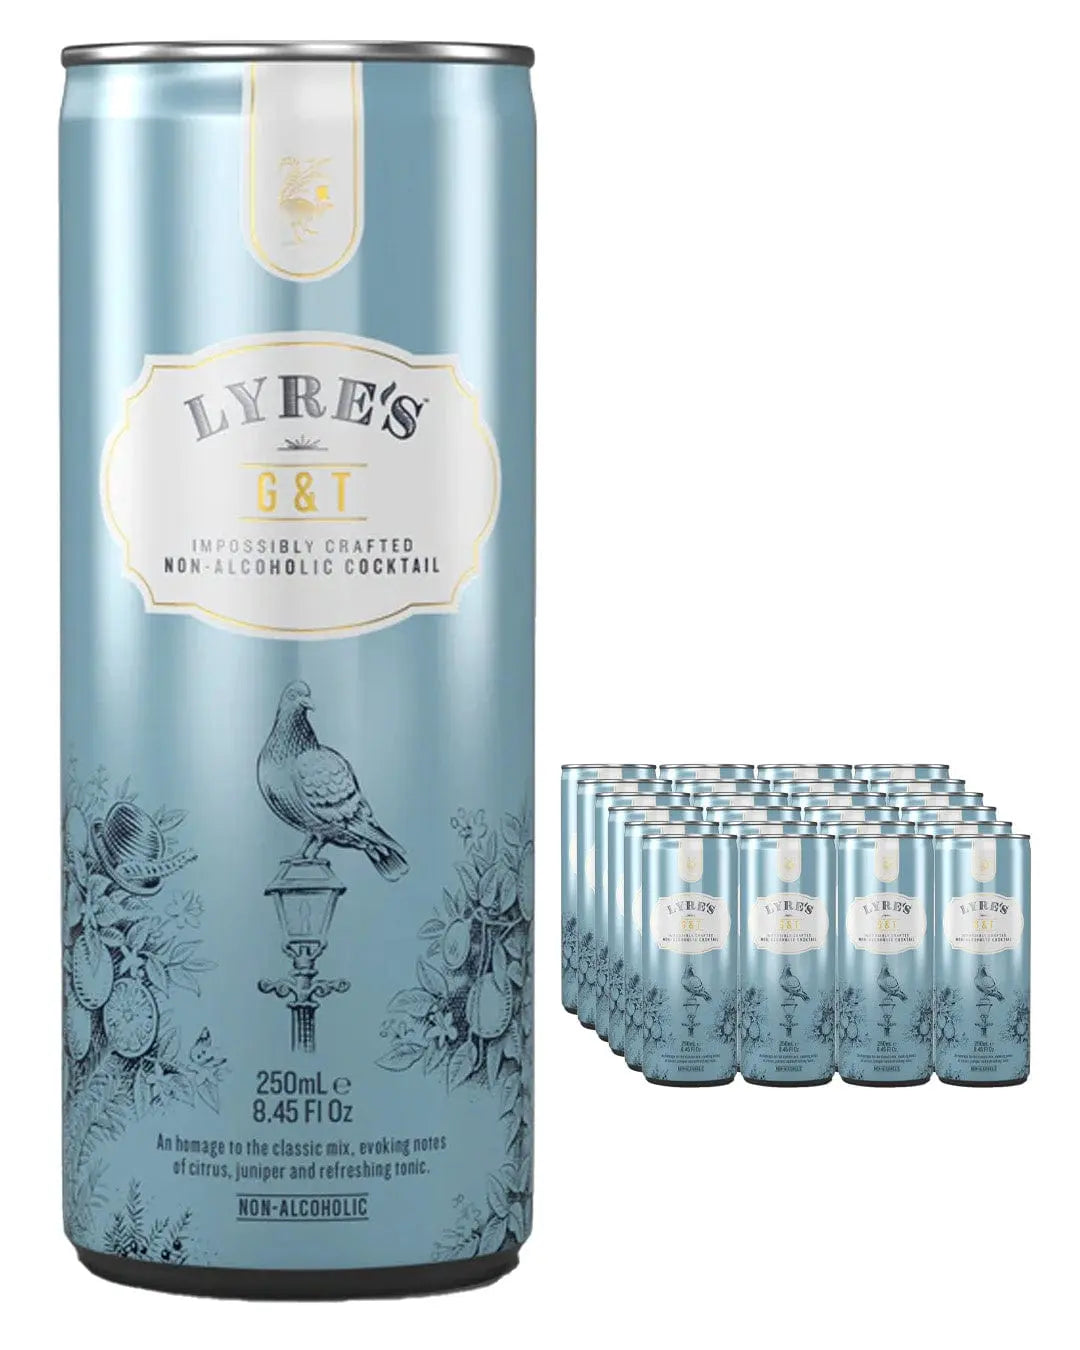 Lyre's Gin & Tonic Premix Non Alcoholic Drinks Multipack, 24 x 250 ml Ready Made Cocktails